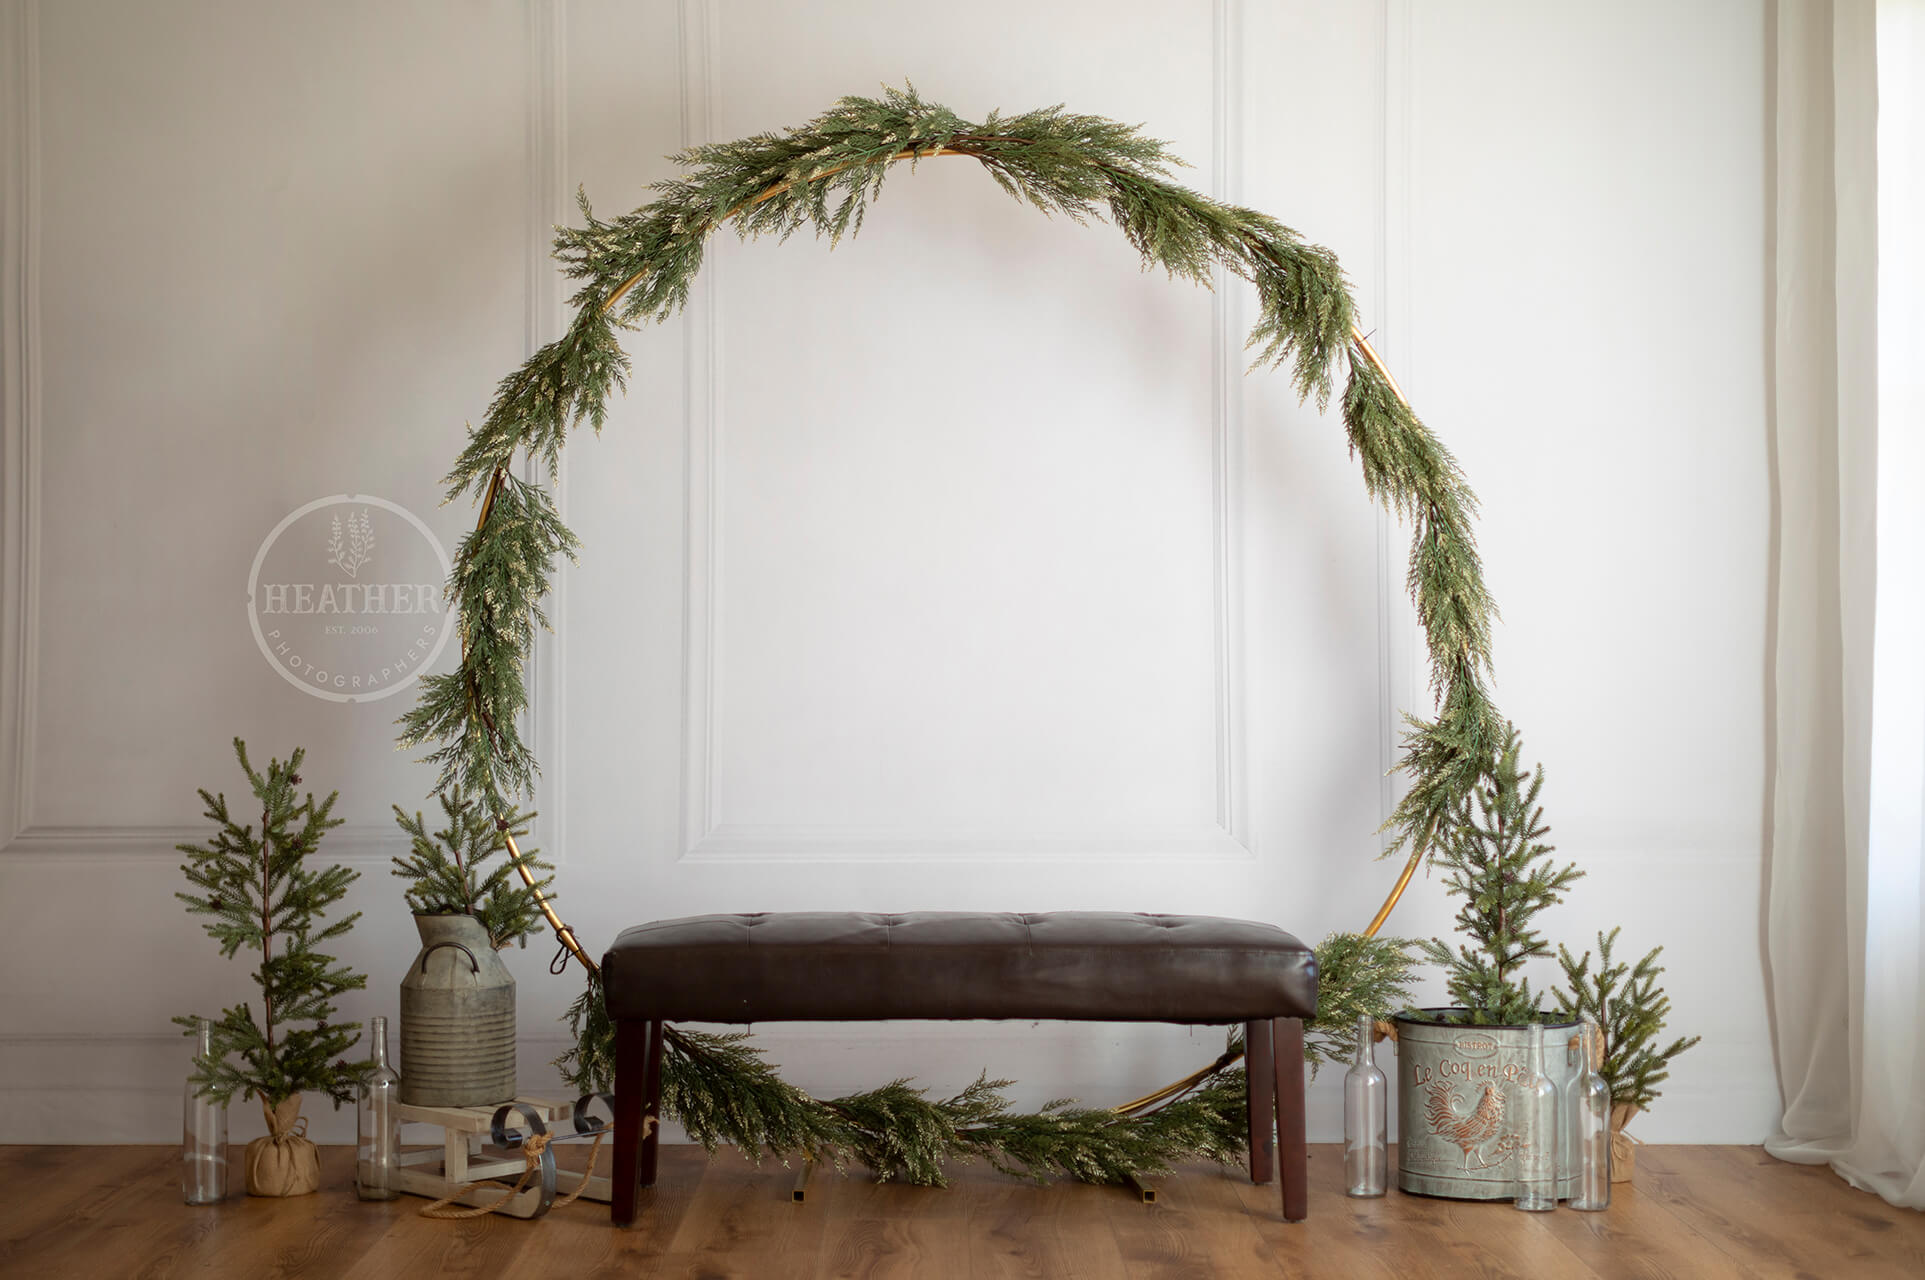 Step into a winter wonderland with a lush evergreen arch backdrop